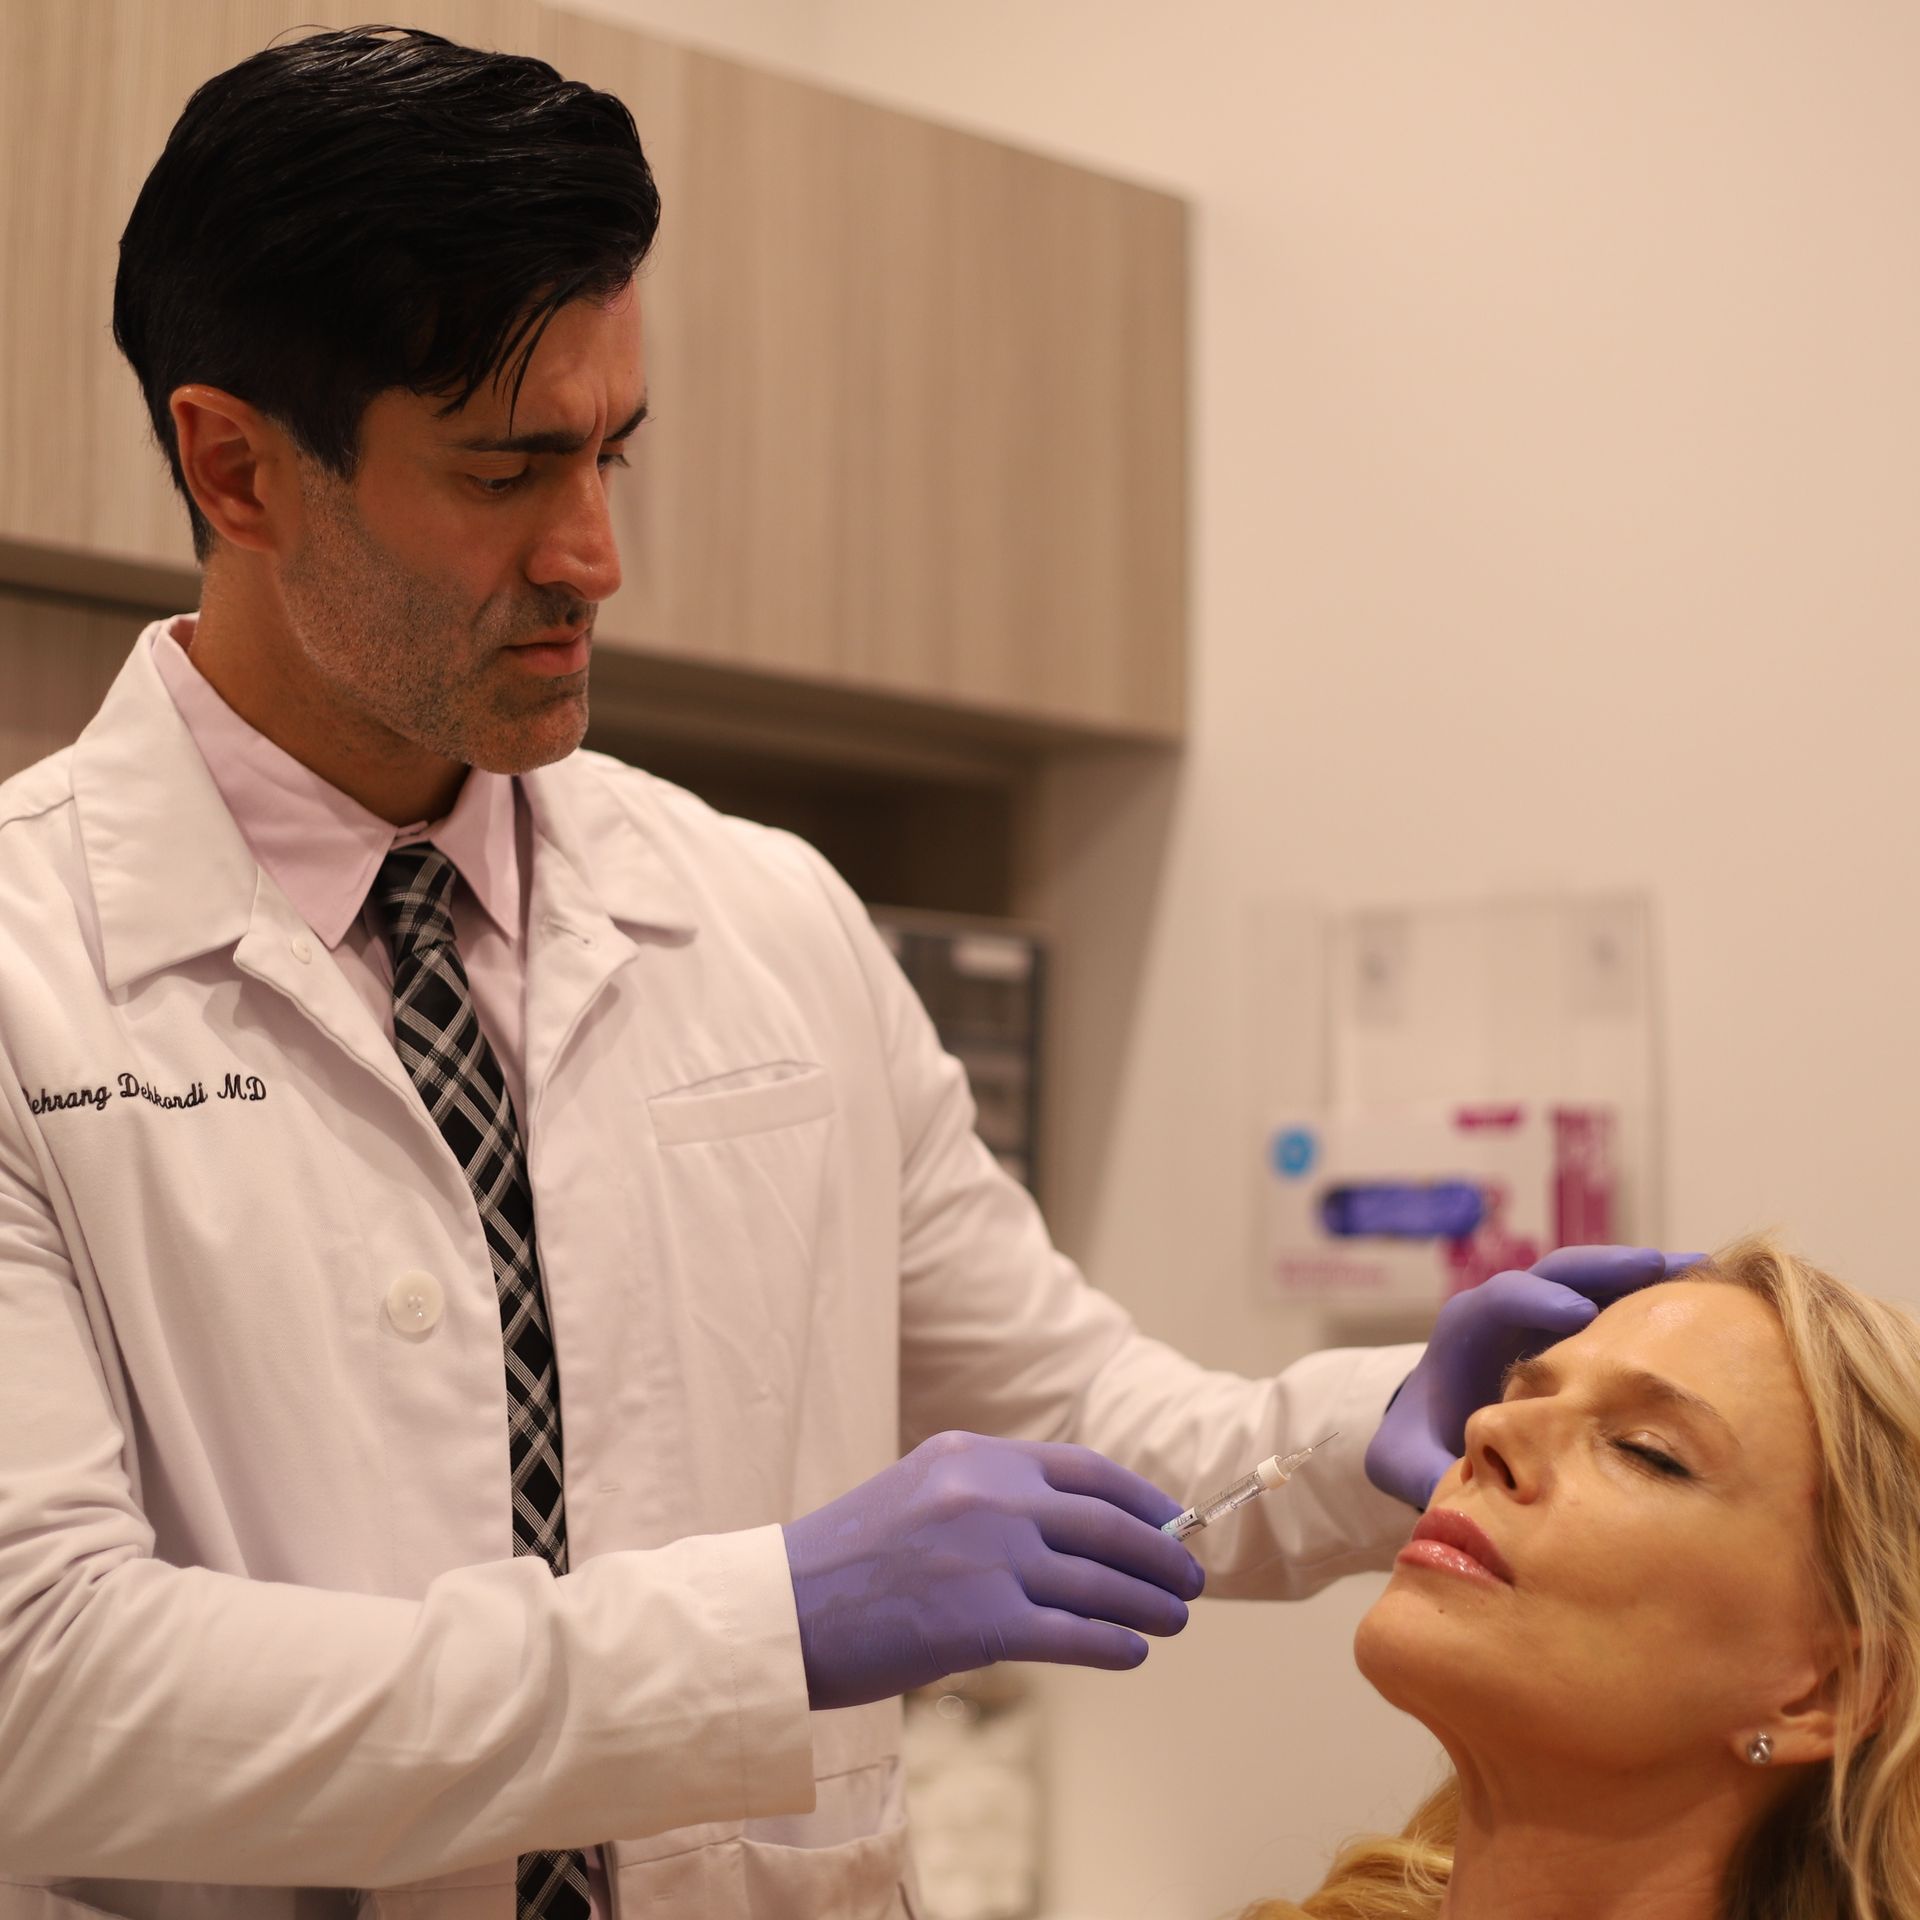 A man in a white coat and purple gloves is examining a woman 's face